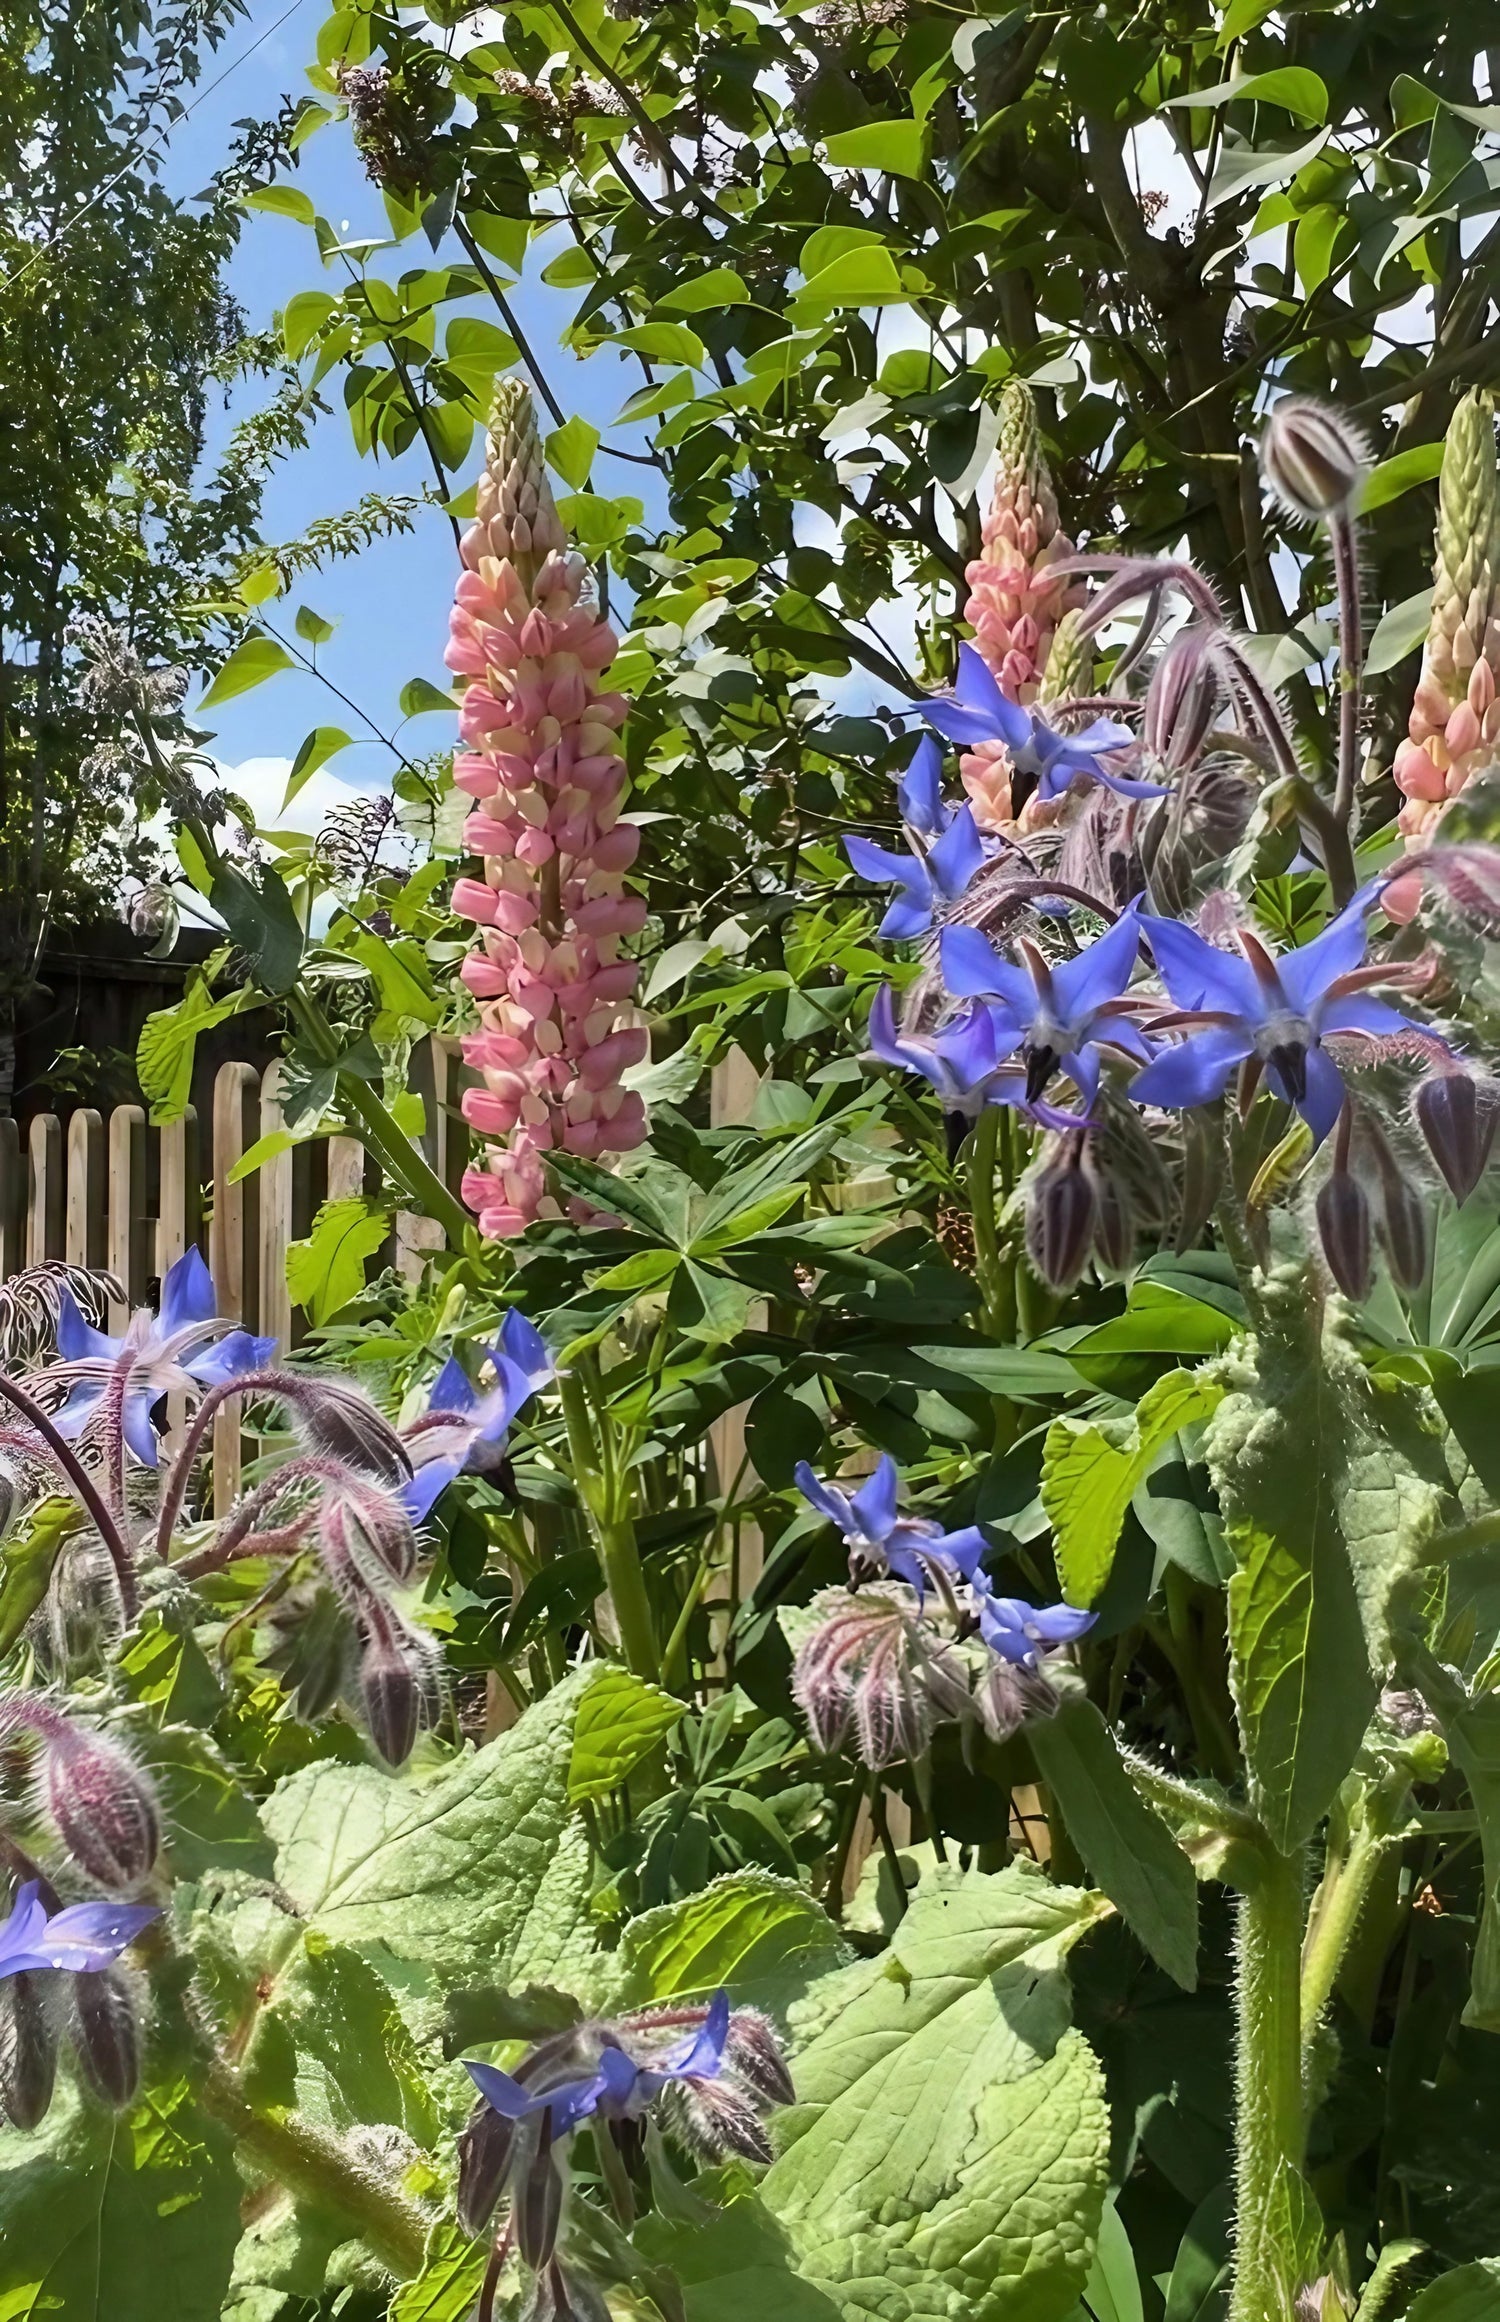 Flowerbed featuring borage with blue and purple blossoms